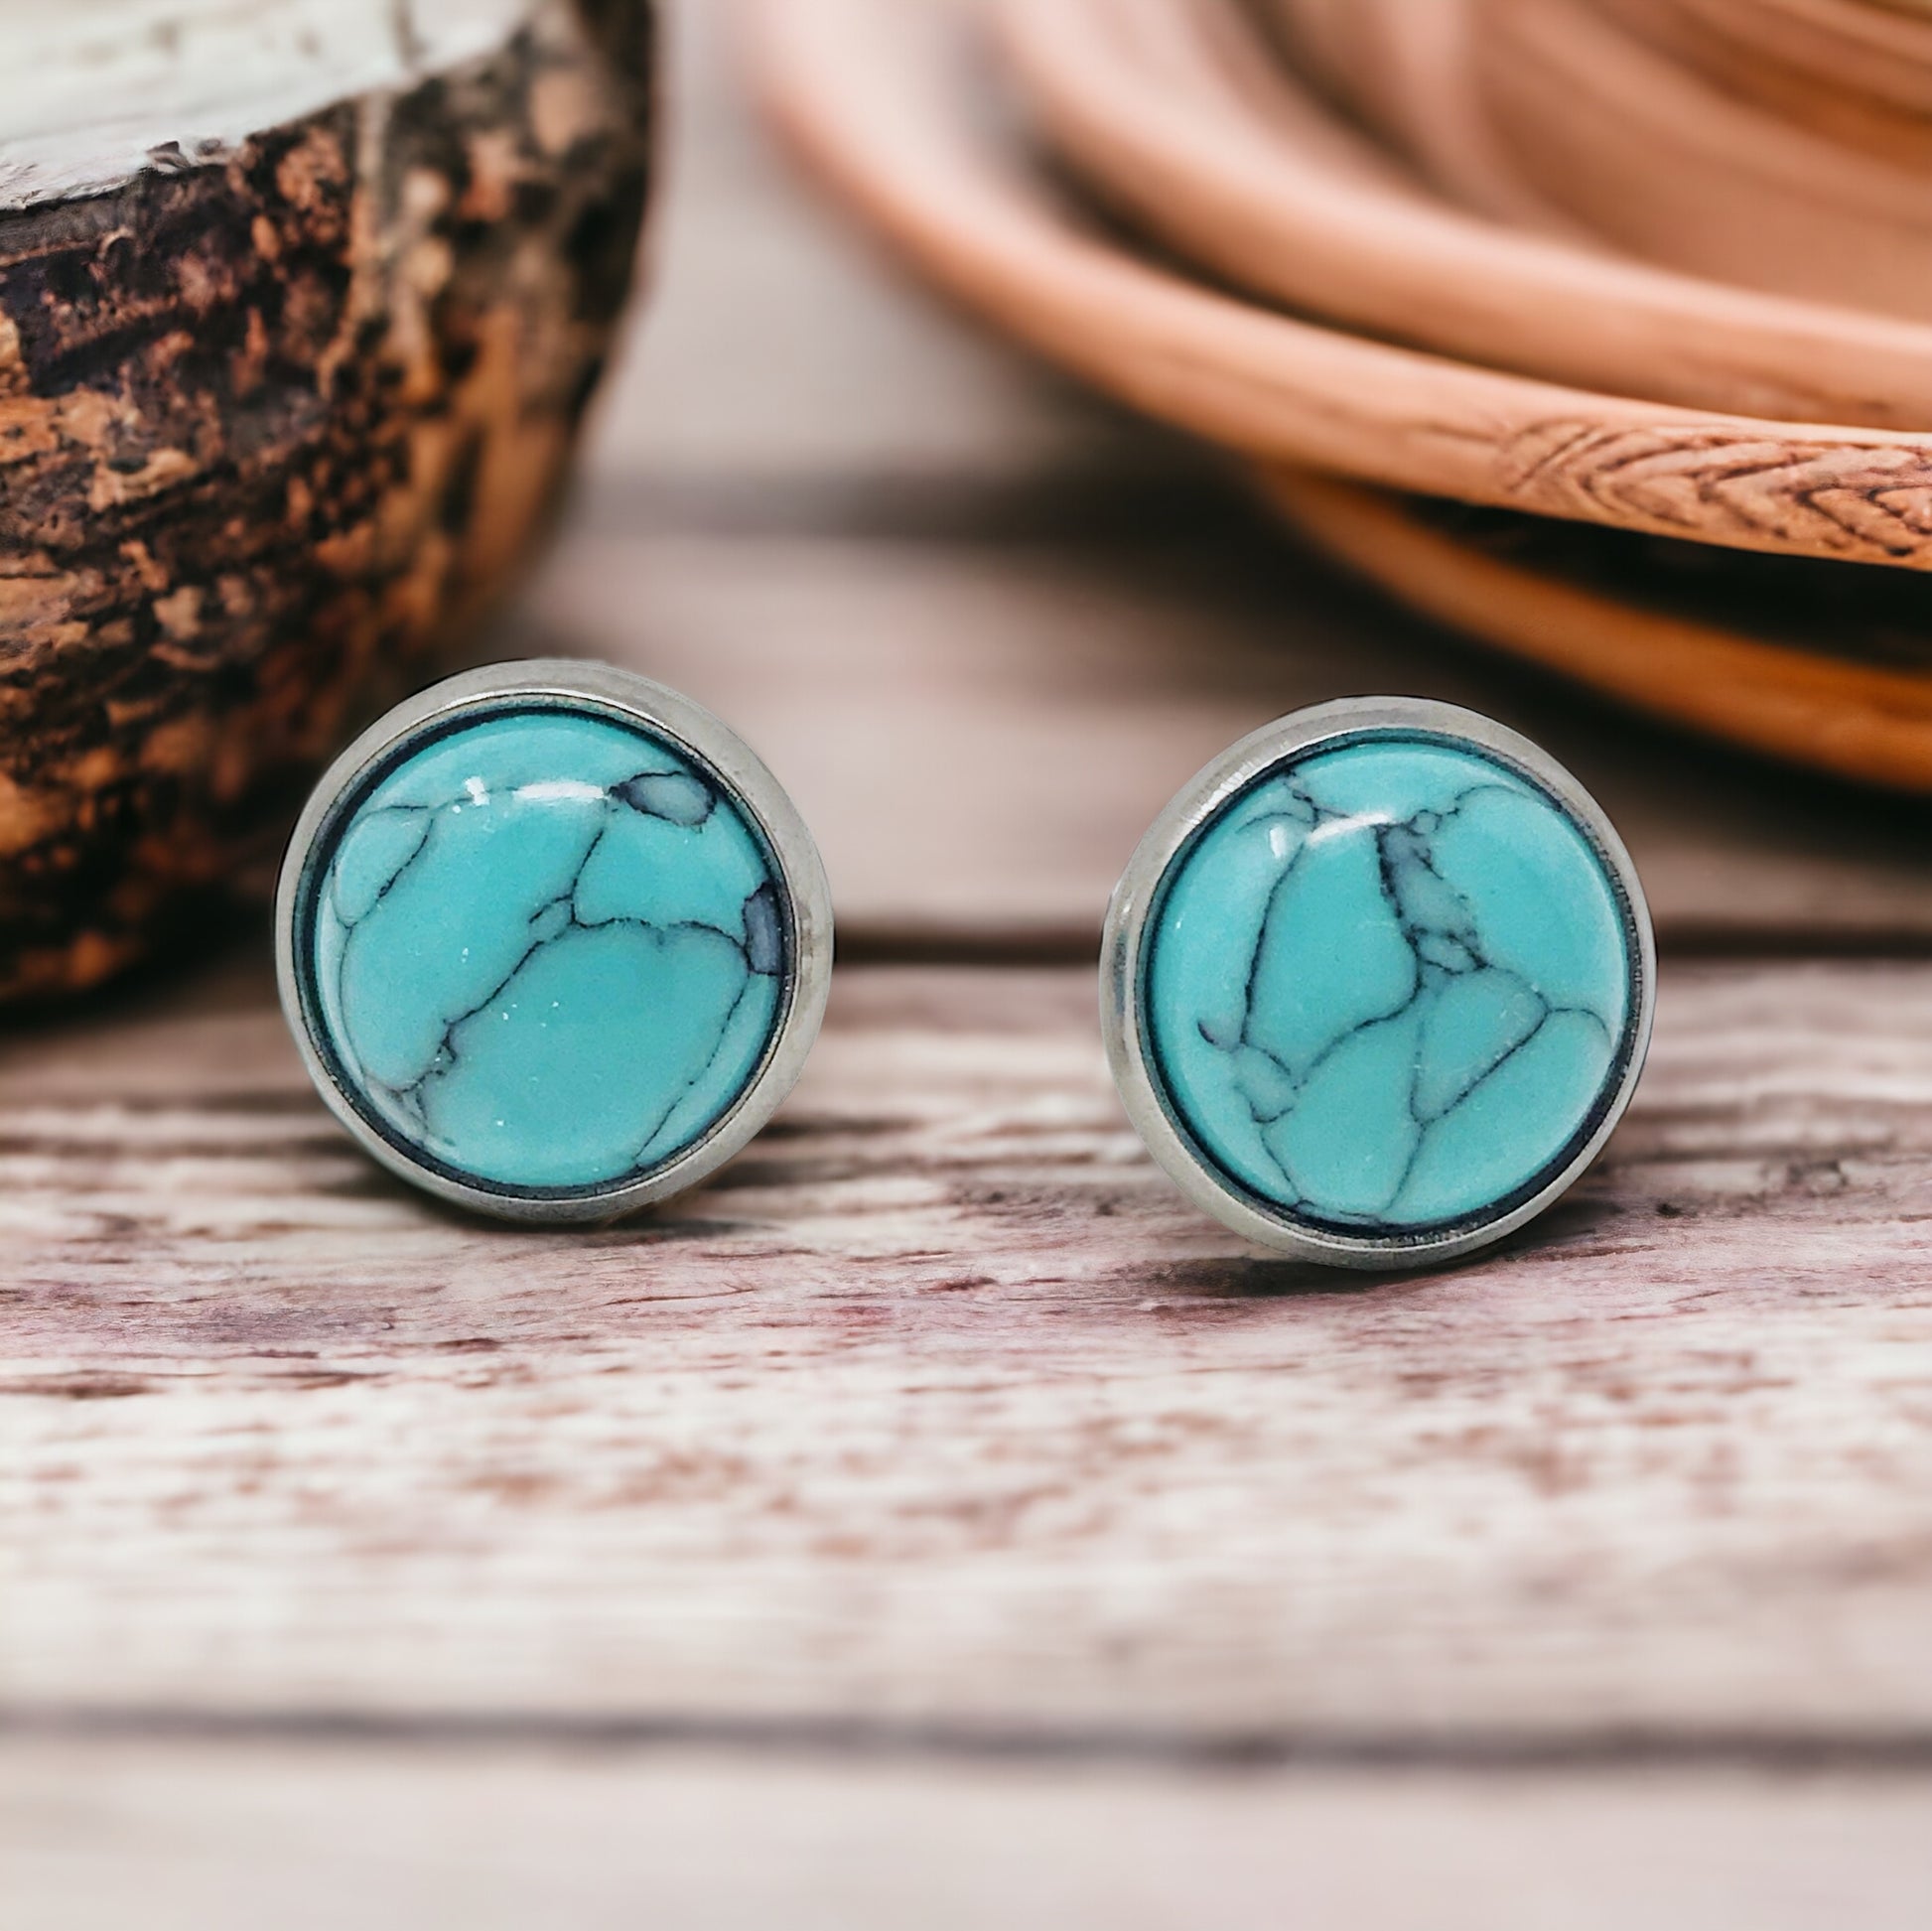 Turquoise 10mm Stud Earrings: Boho Western Chic Accessories